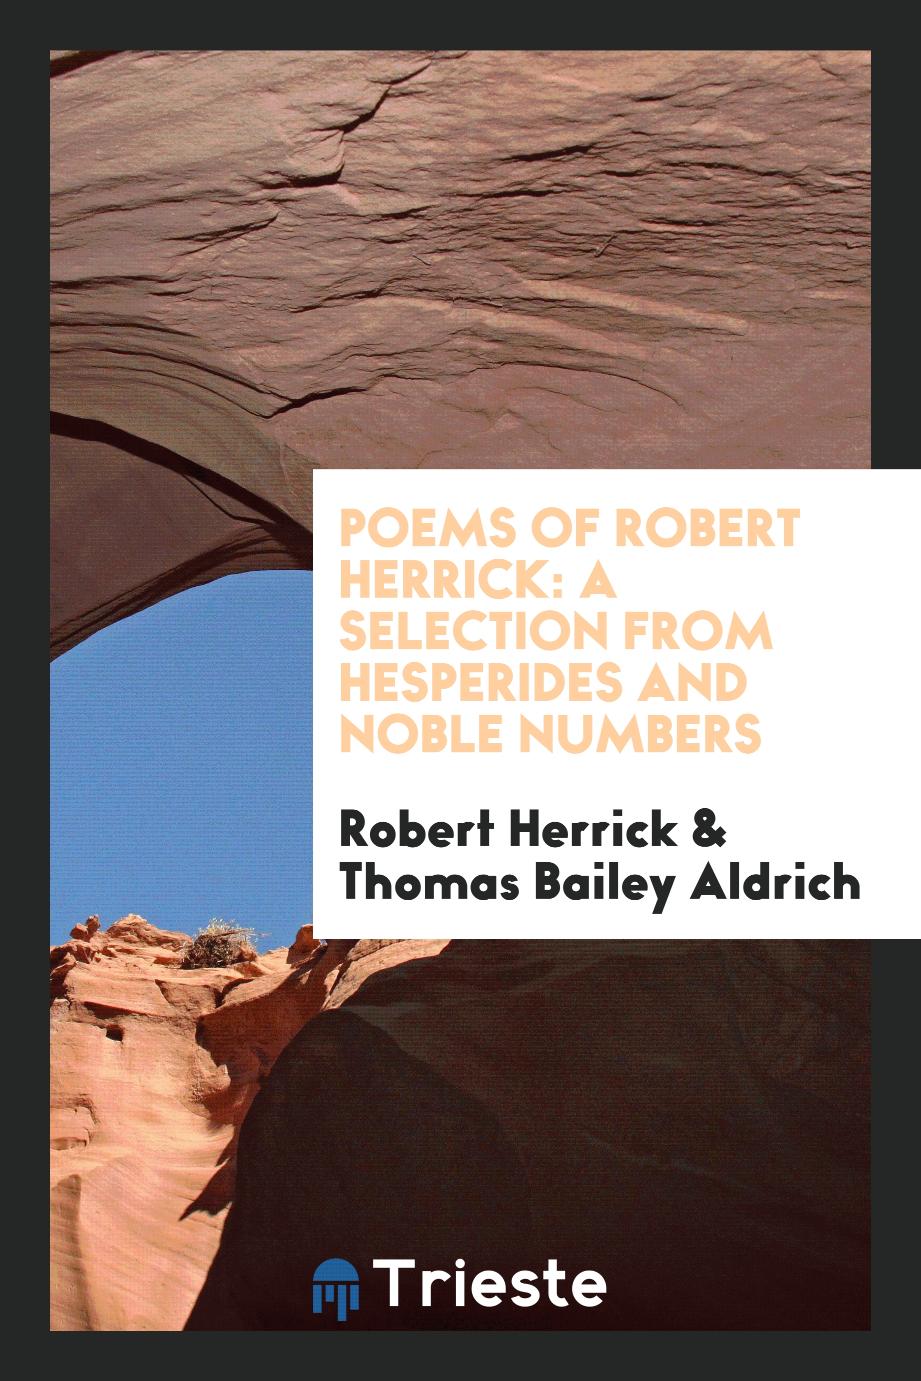 Poems of Robert Herrick: a selection from Hesperides and Noble numbers